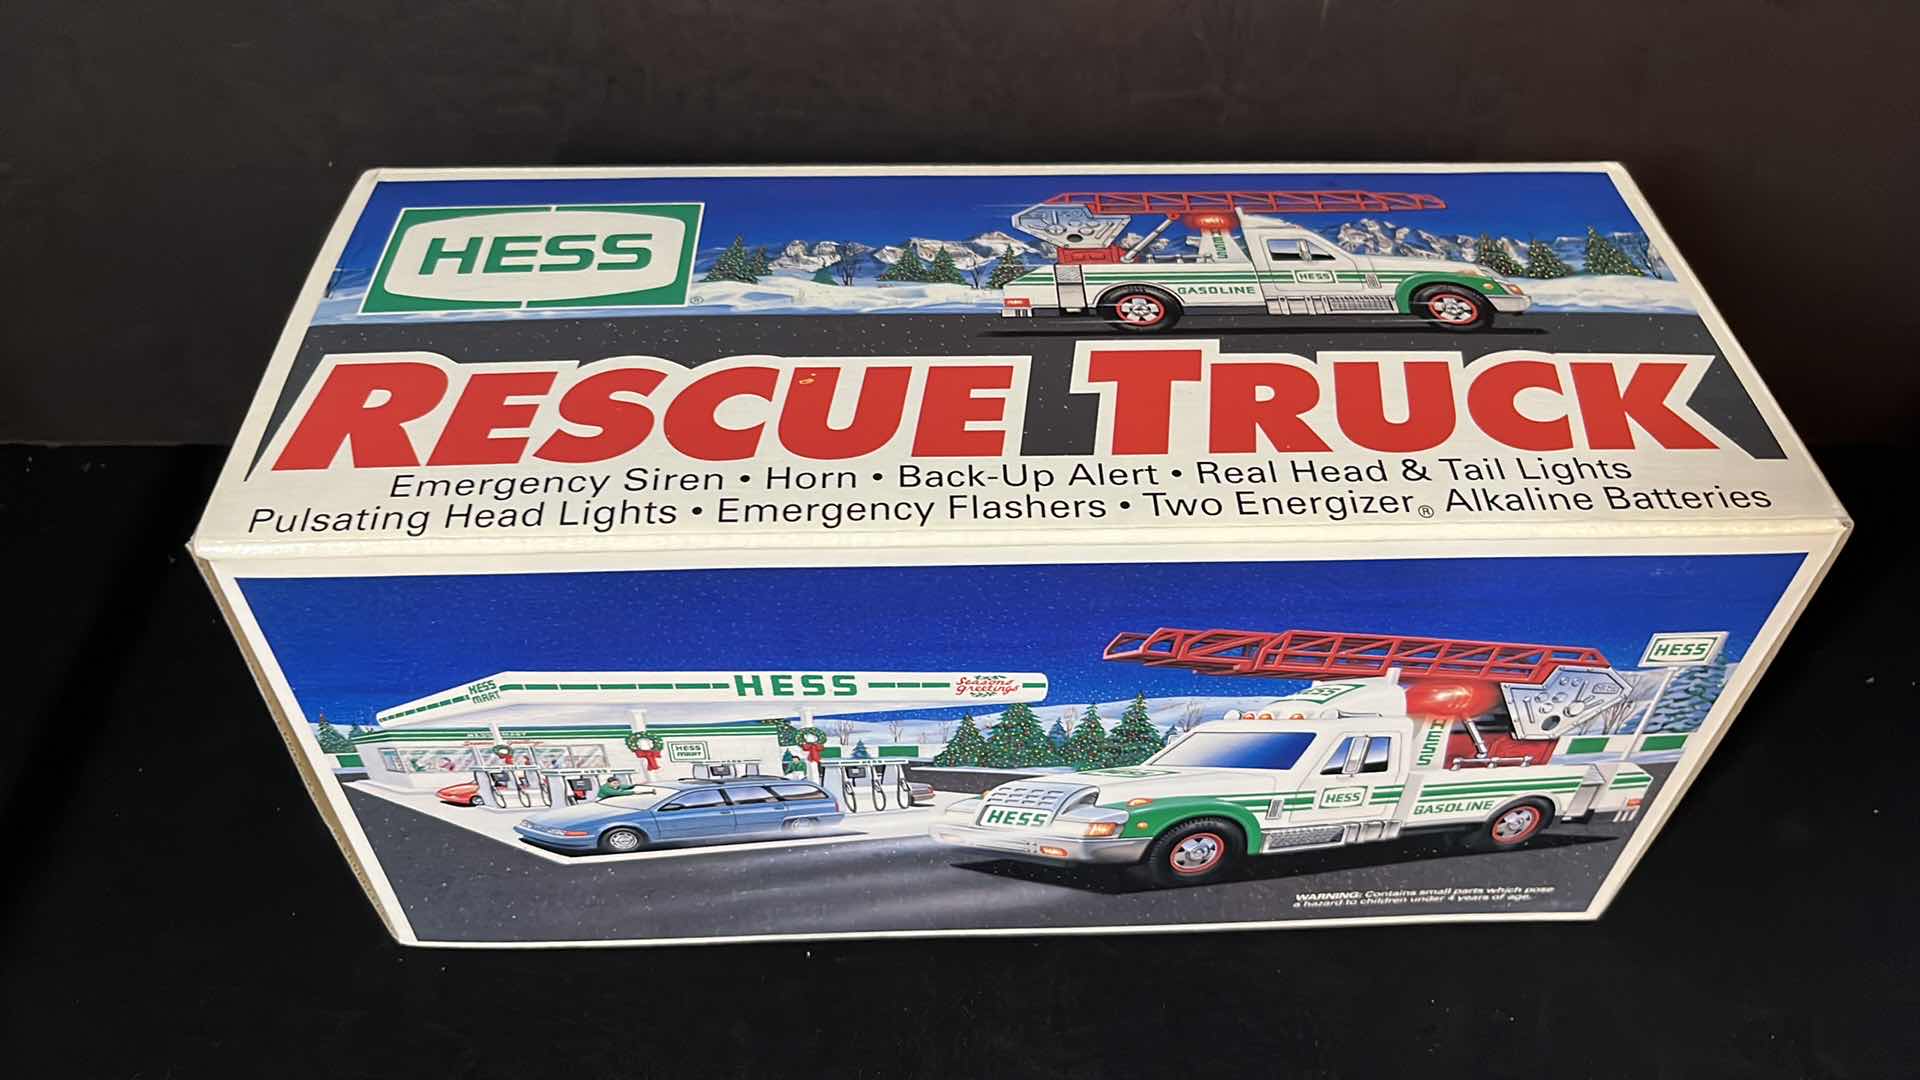 Photo 2 of HESS RESCUE TRUCK 1994